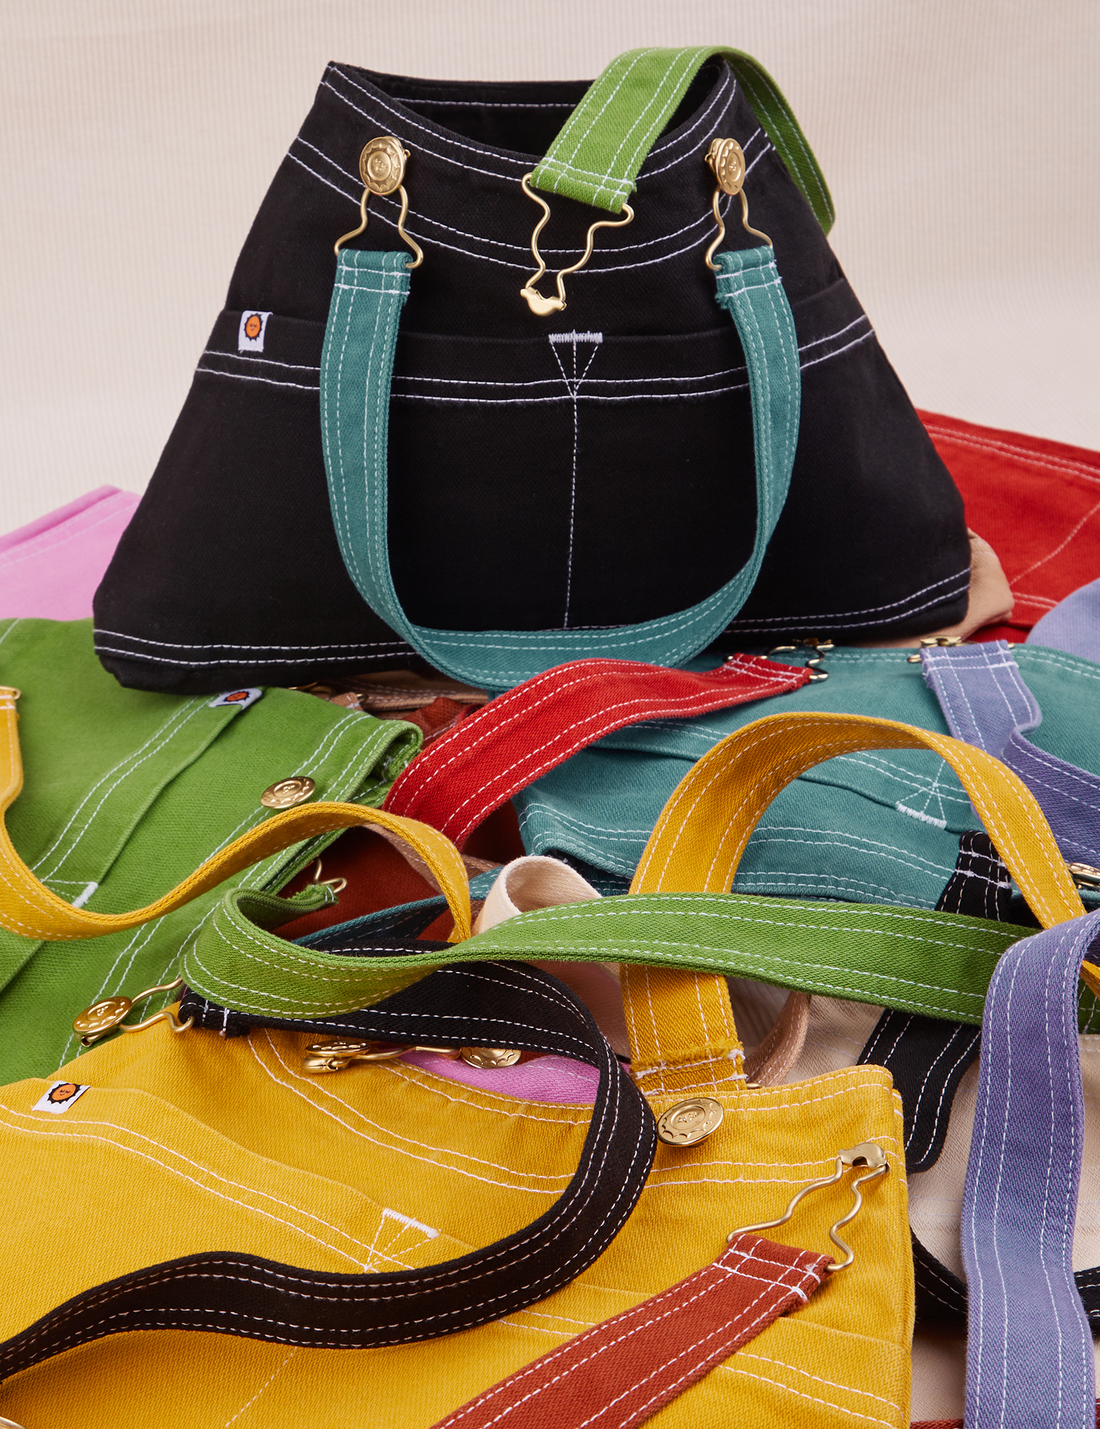 Overall Handbag in an array of colors. Black standing up with marine blue strap. All other bags laid flat underneath and around black bag.